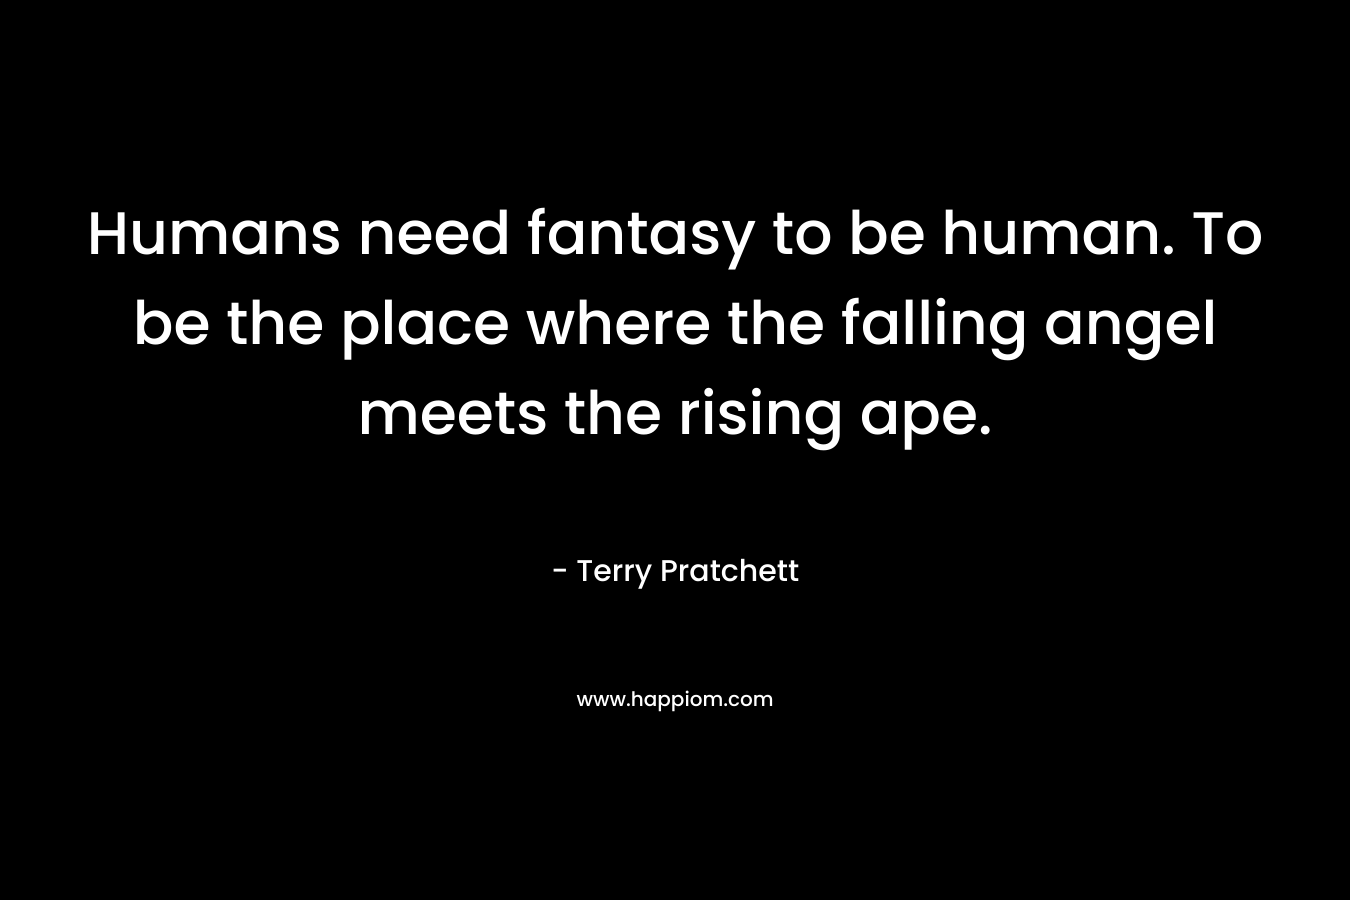 Humans need fantasy to be human. To be the place where the falling angel meets the rising ape.